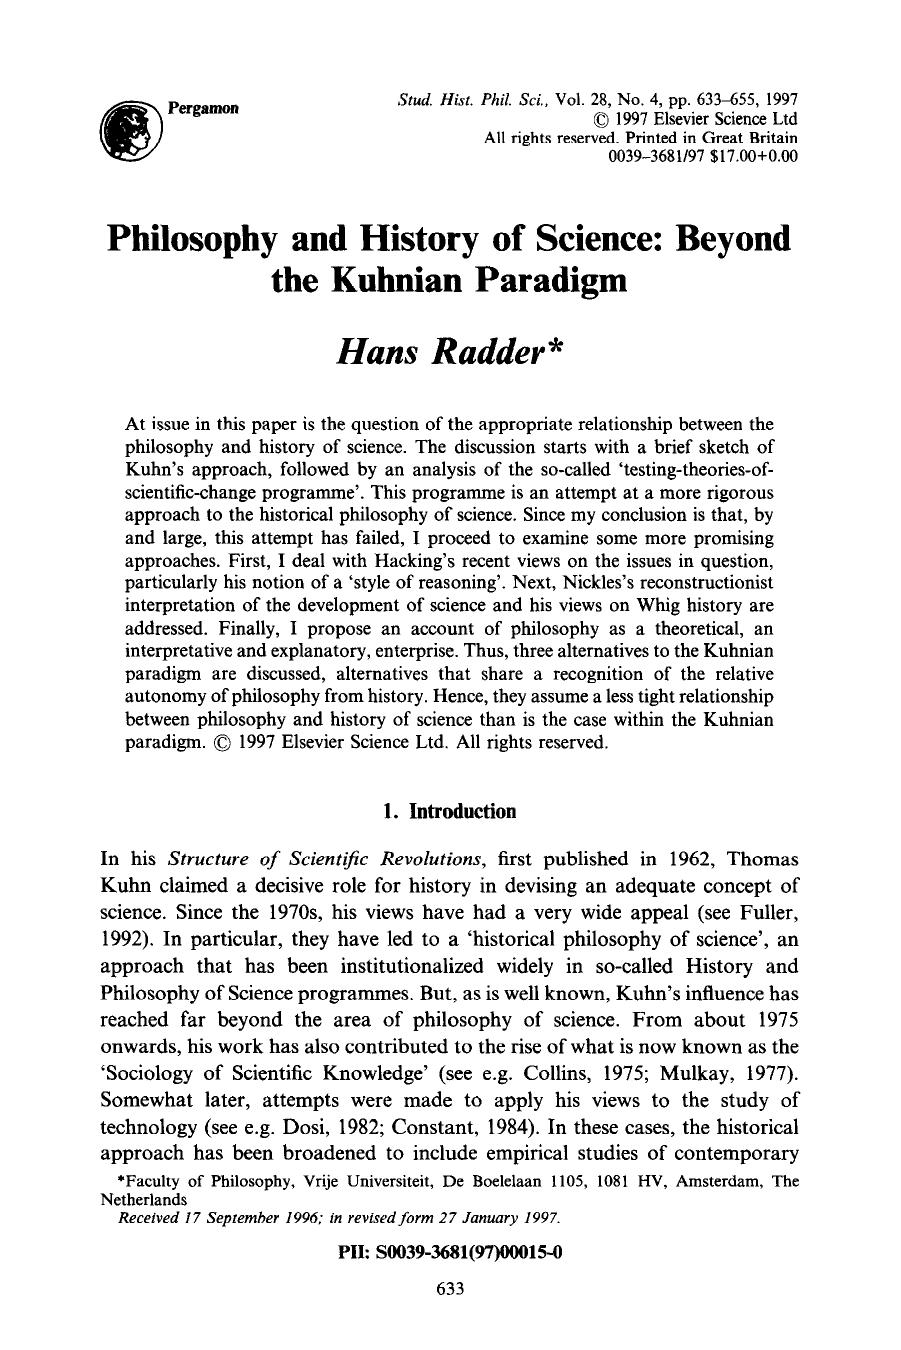 Philosophy and History of Science - Beyond the Kuhnian Paradigm - Paper